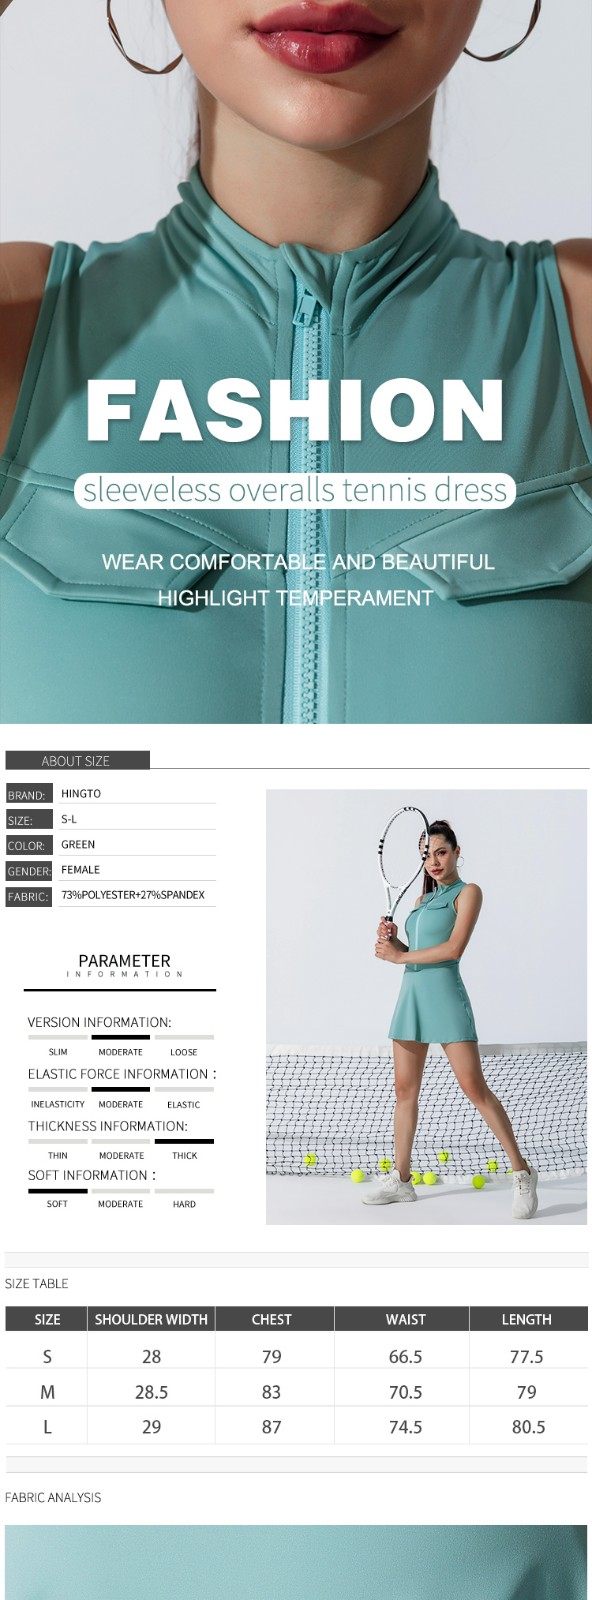 custom woman tennis clothes production for women-2